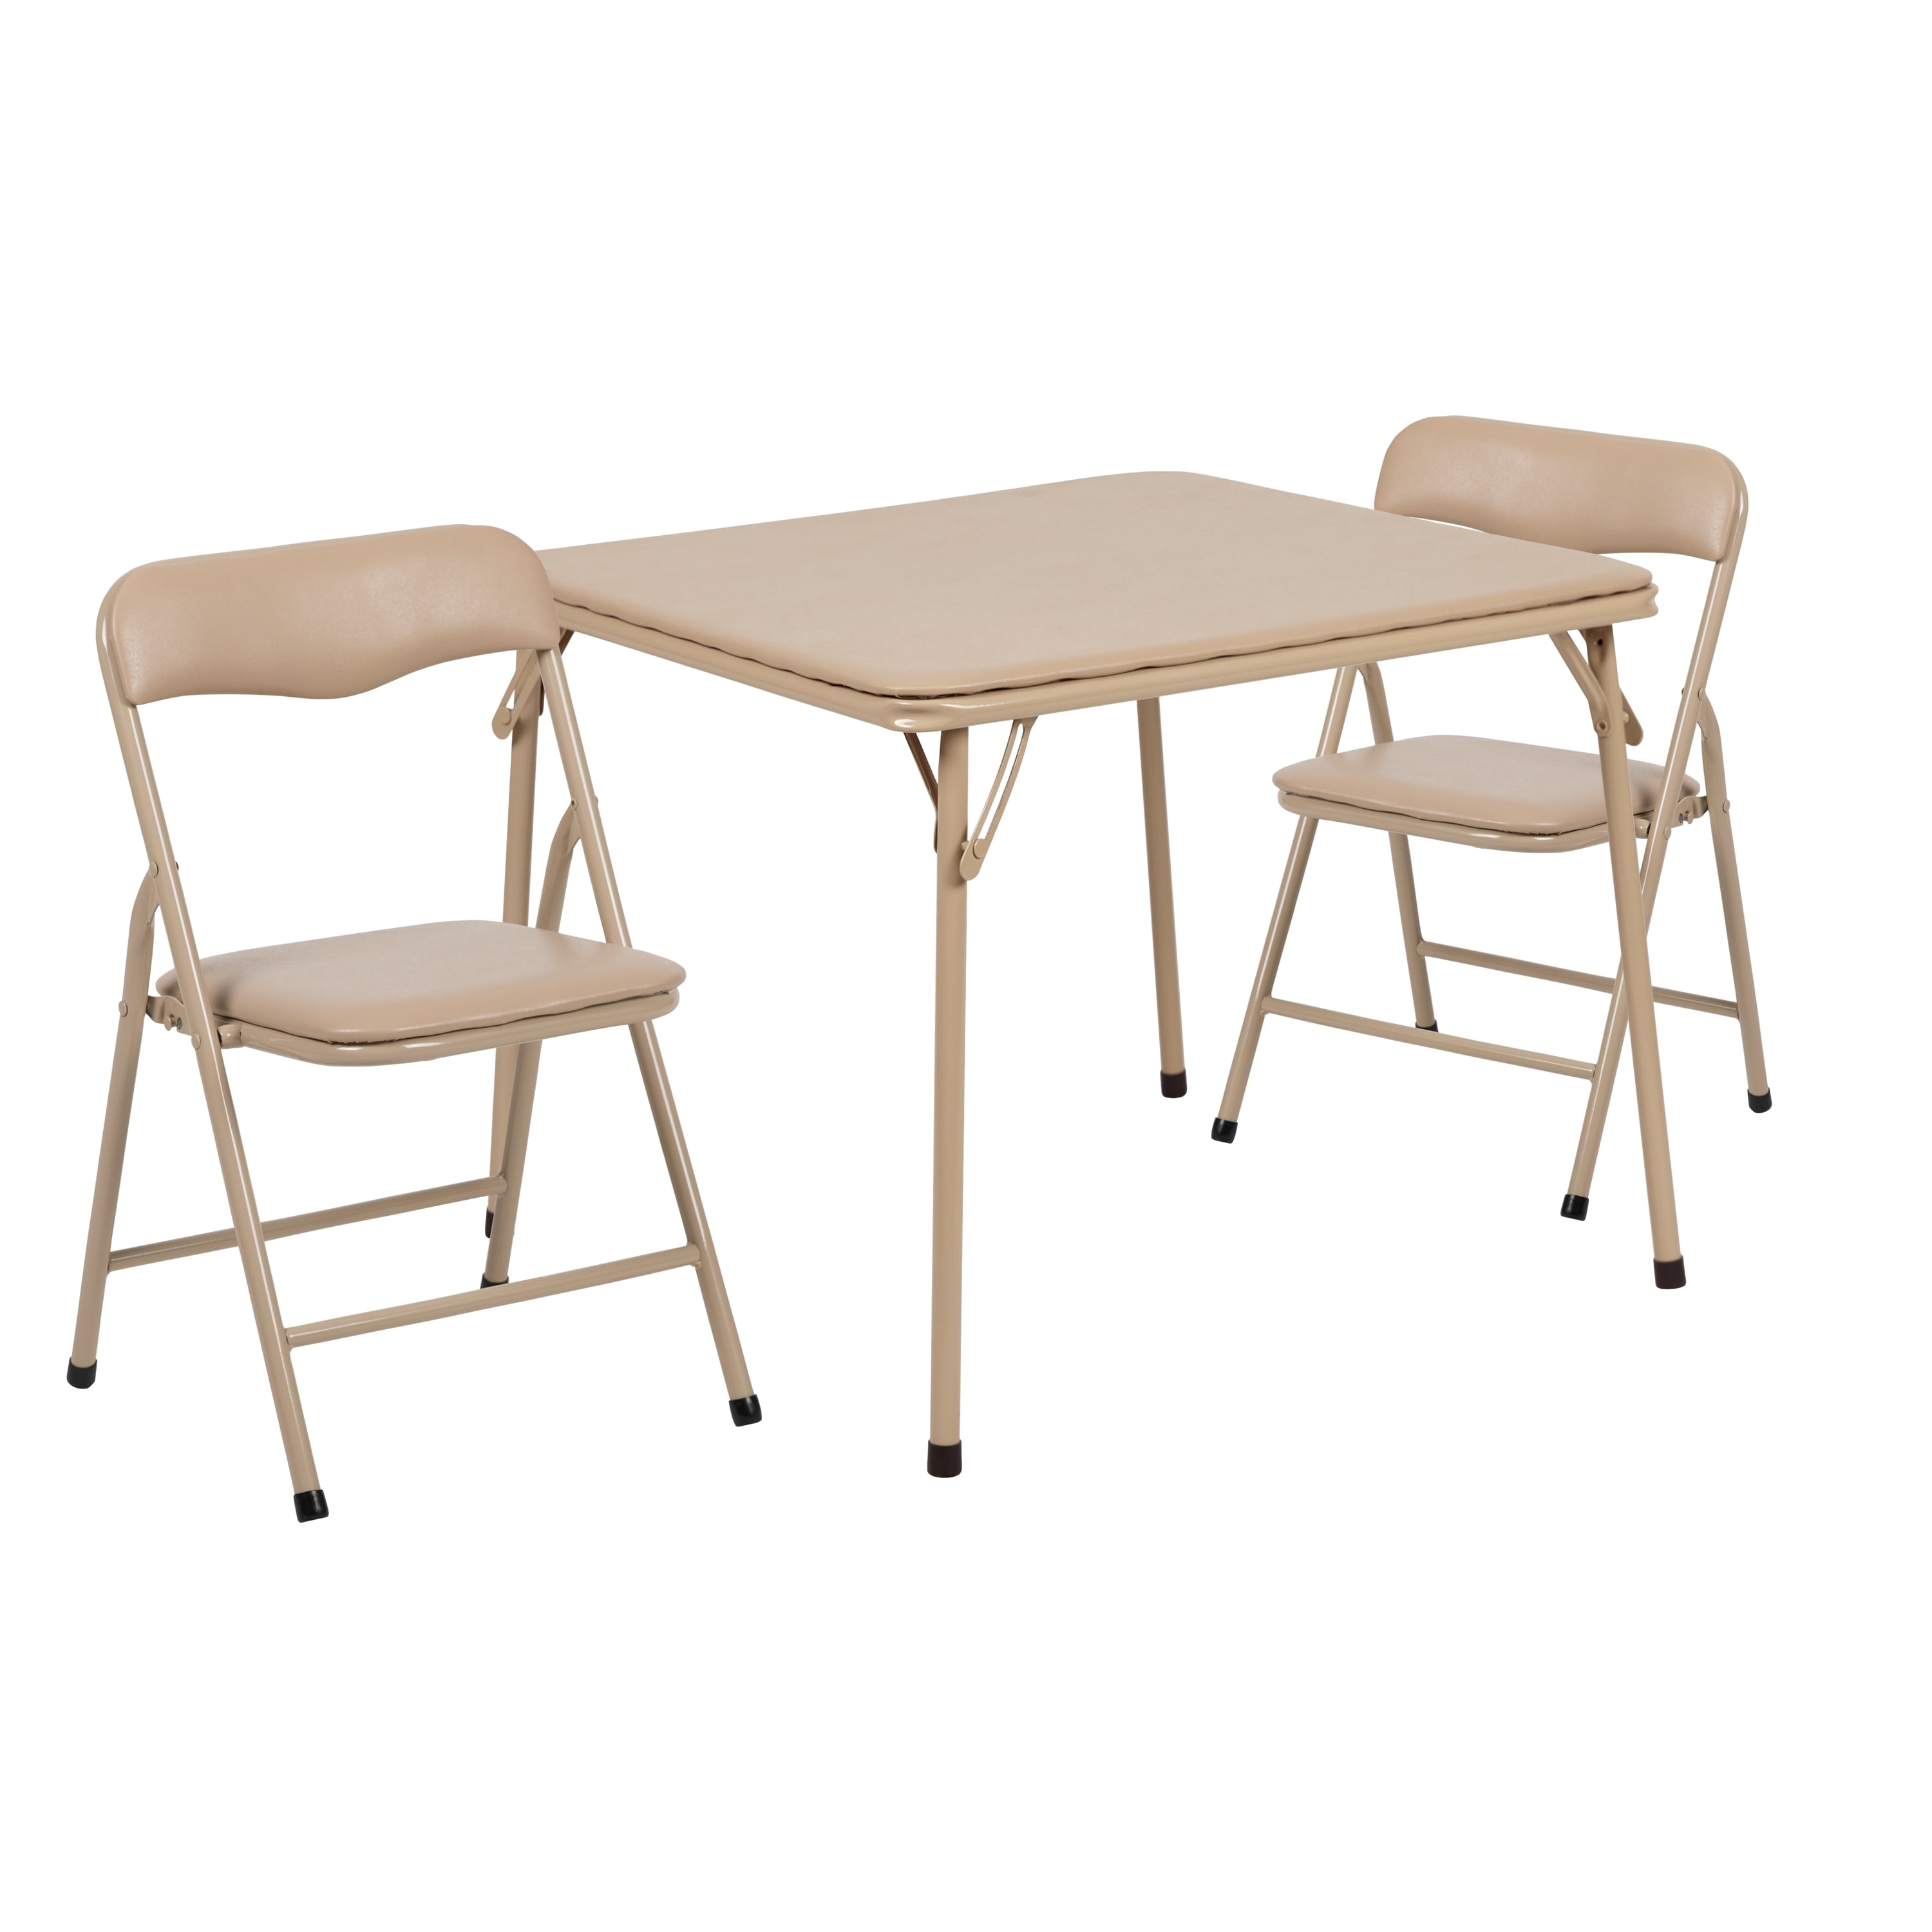 children's portable table and chairs